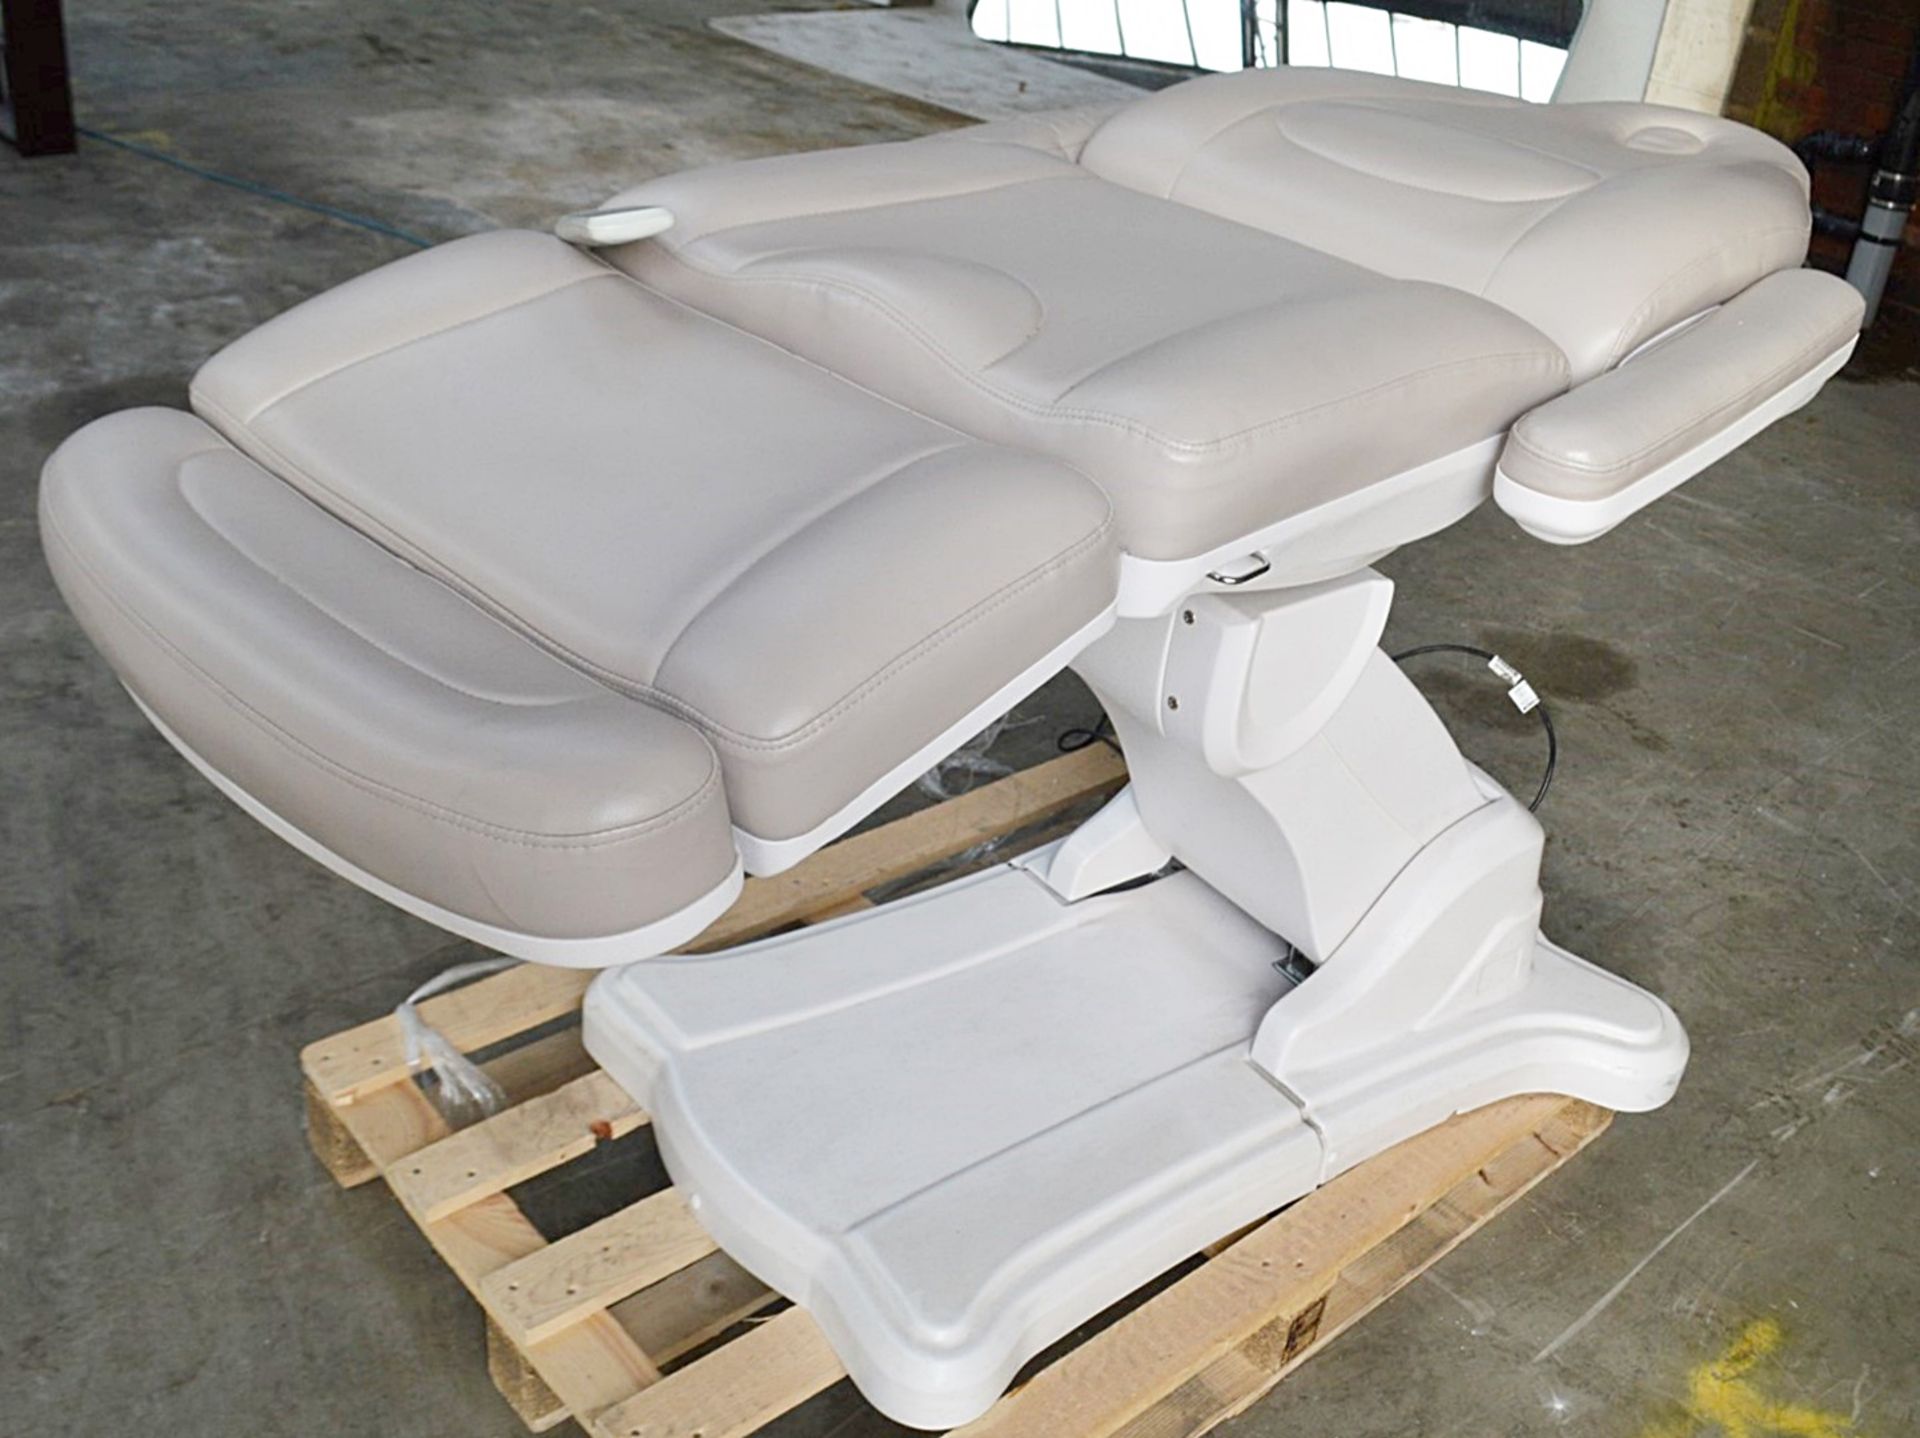 1 x Professional Electric-Hydraulic Massage Table Spa Bed With Remote Control - See Full Description - Image 12 of 15